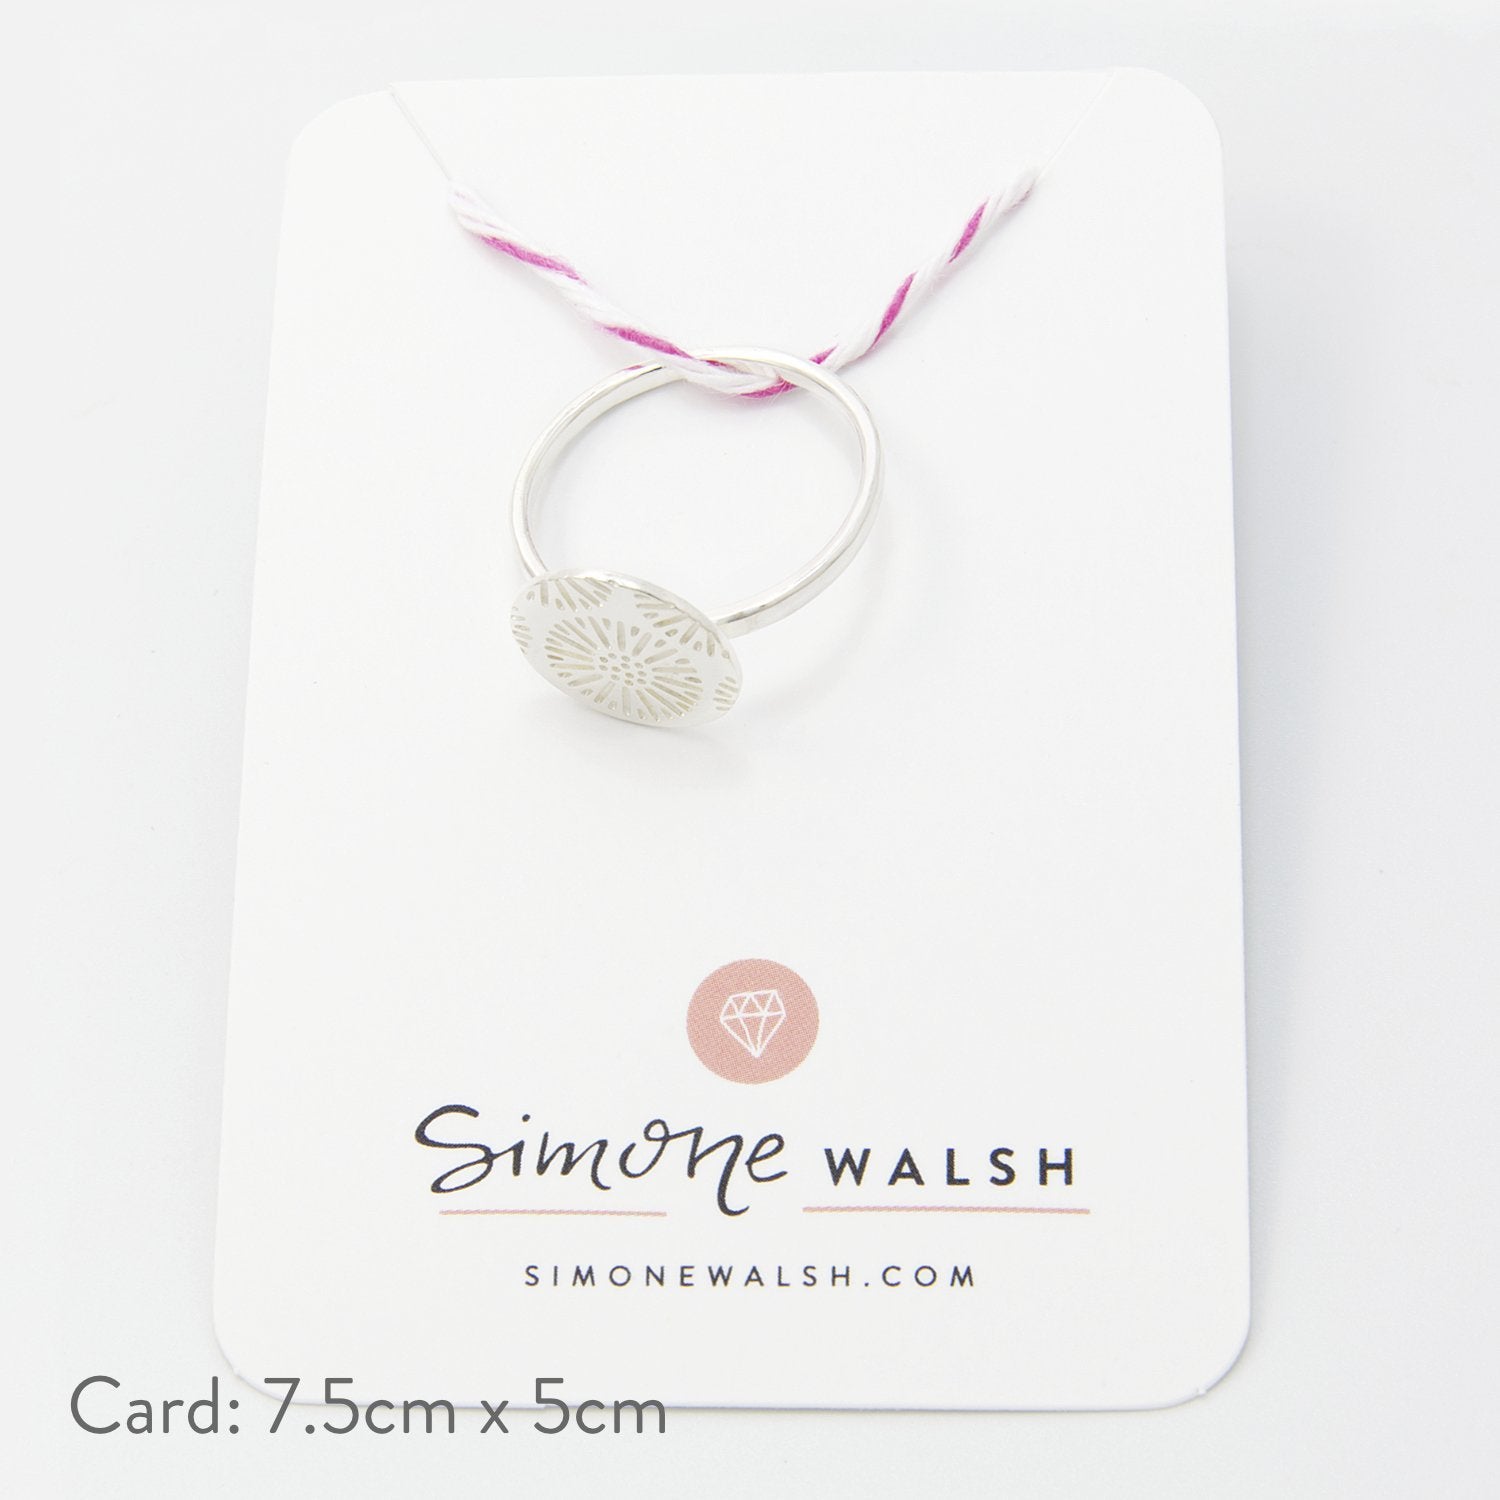 Coral texture silver cocktail ring - Simone Walsh Jewellery Australia